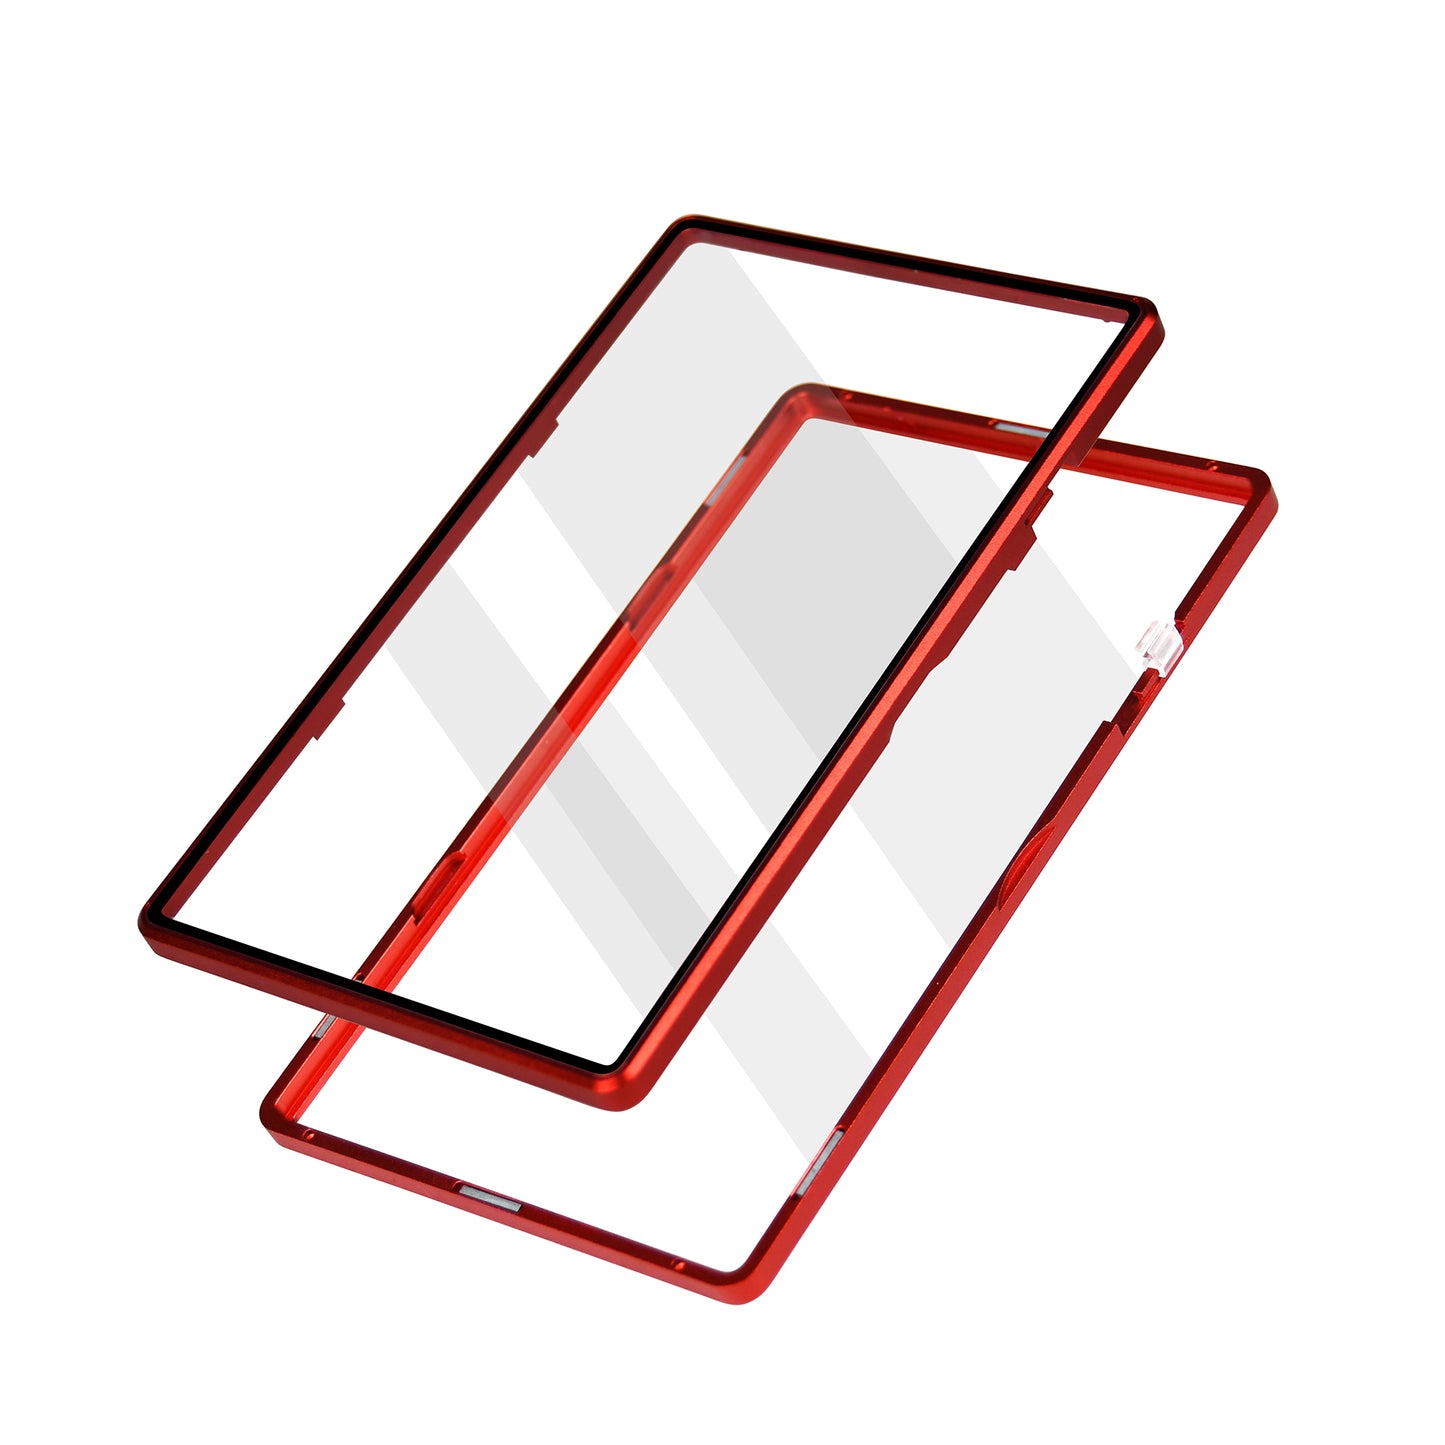 Standard PSA Slabmags (Compatible With Standard CGC, CSG & AGS Slabs)